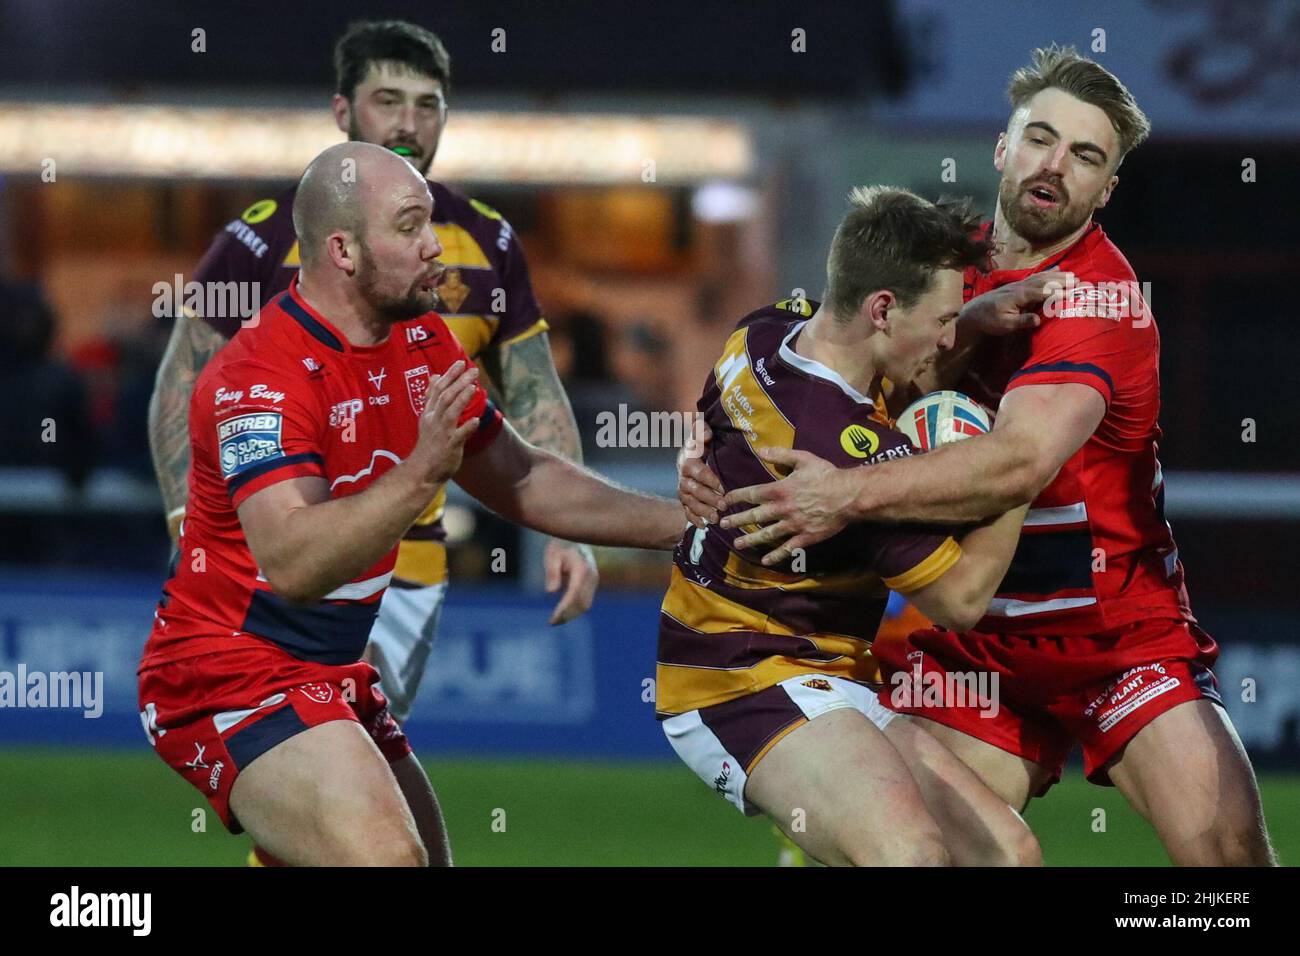 Tom Garratt (26) and George King (10) of Hull KR in action during the ...